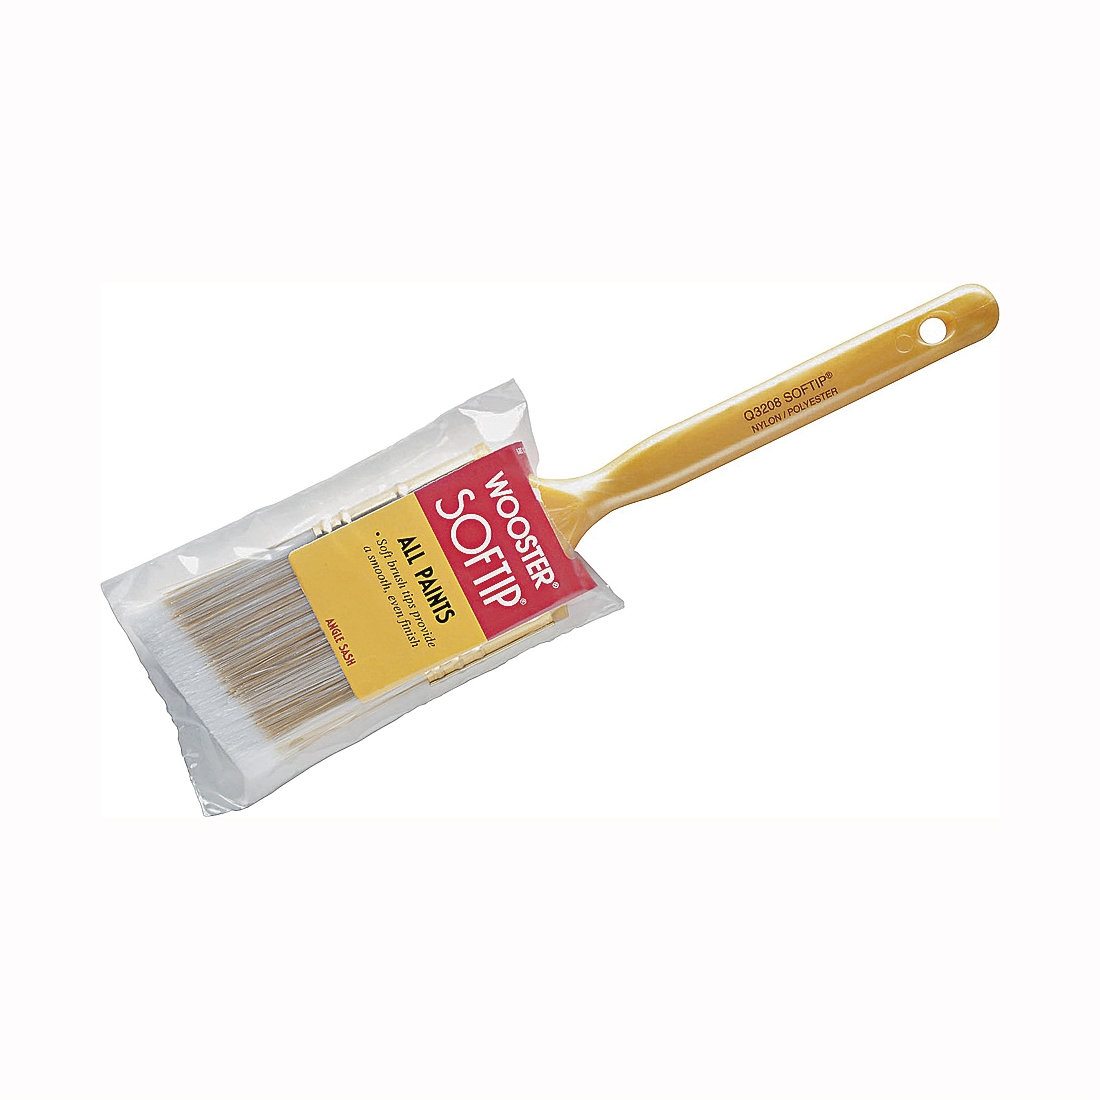 Wooster Q3208-1-1/2 Paint Brush, 1-1/2 in W, 2-3/16 in L Bristle, Nylon/Polyester Bristle, Beaver Tail Handle